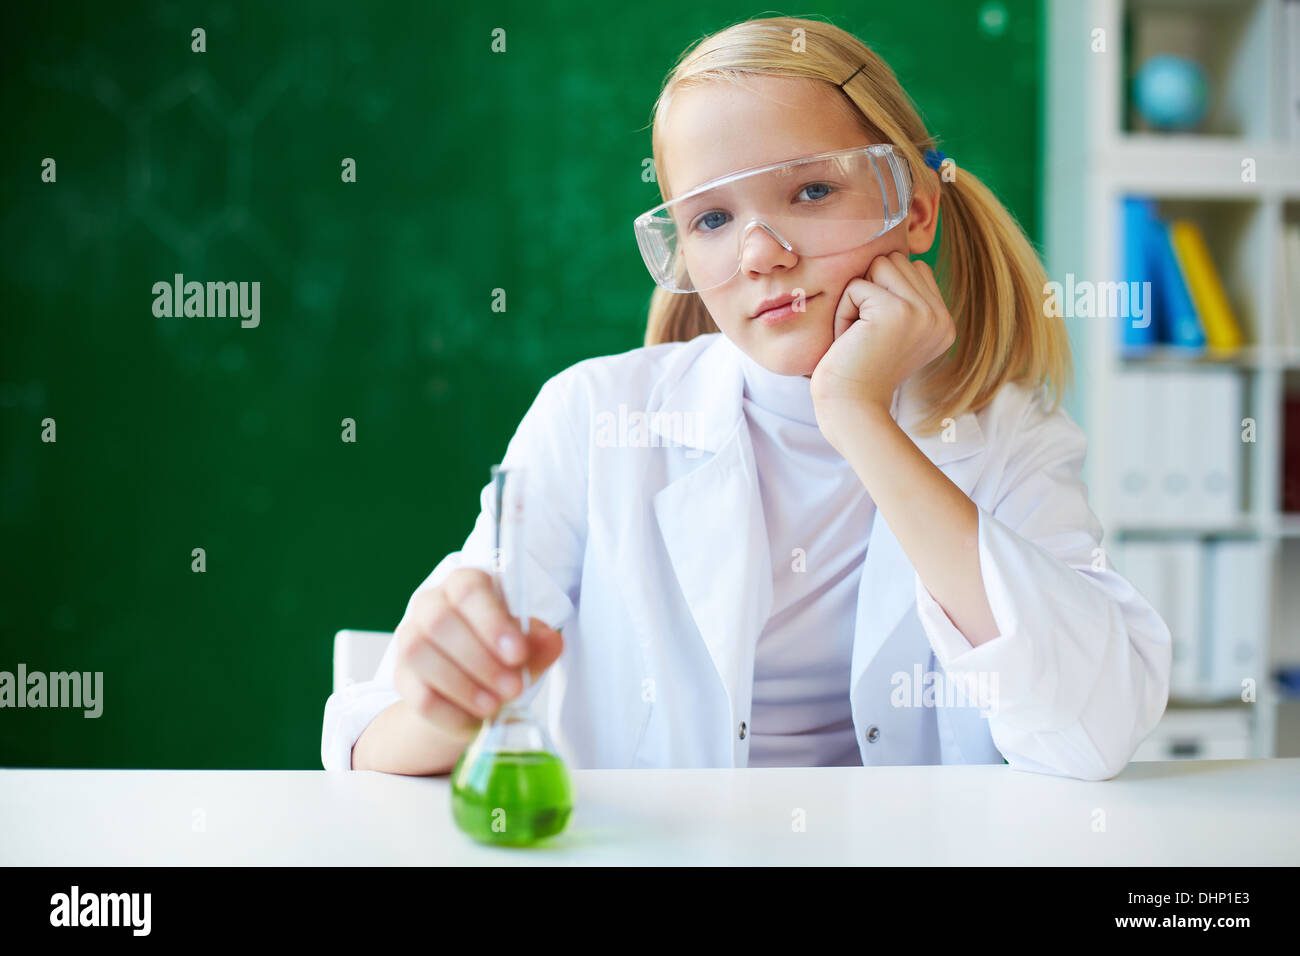 Portrait of cute schoolgirl sitting at workplace with chemical liquid in front Stock Photo